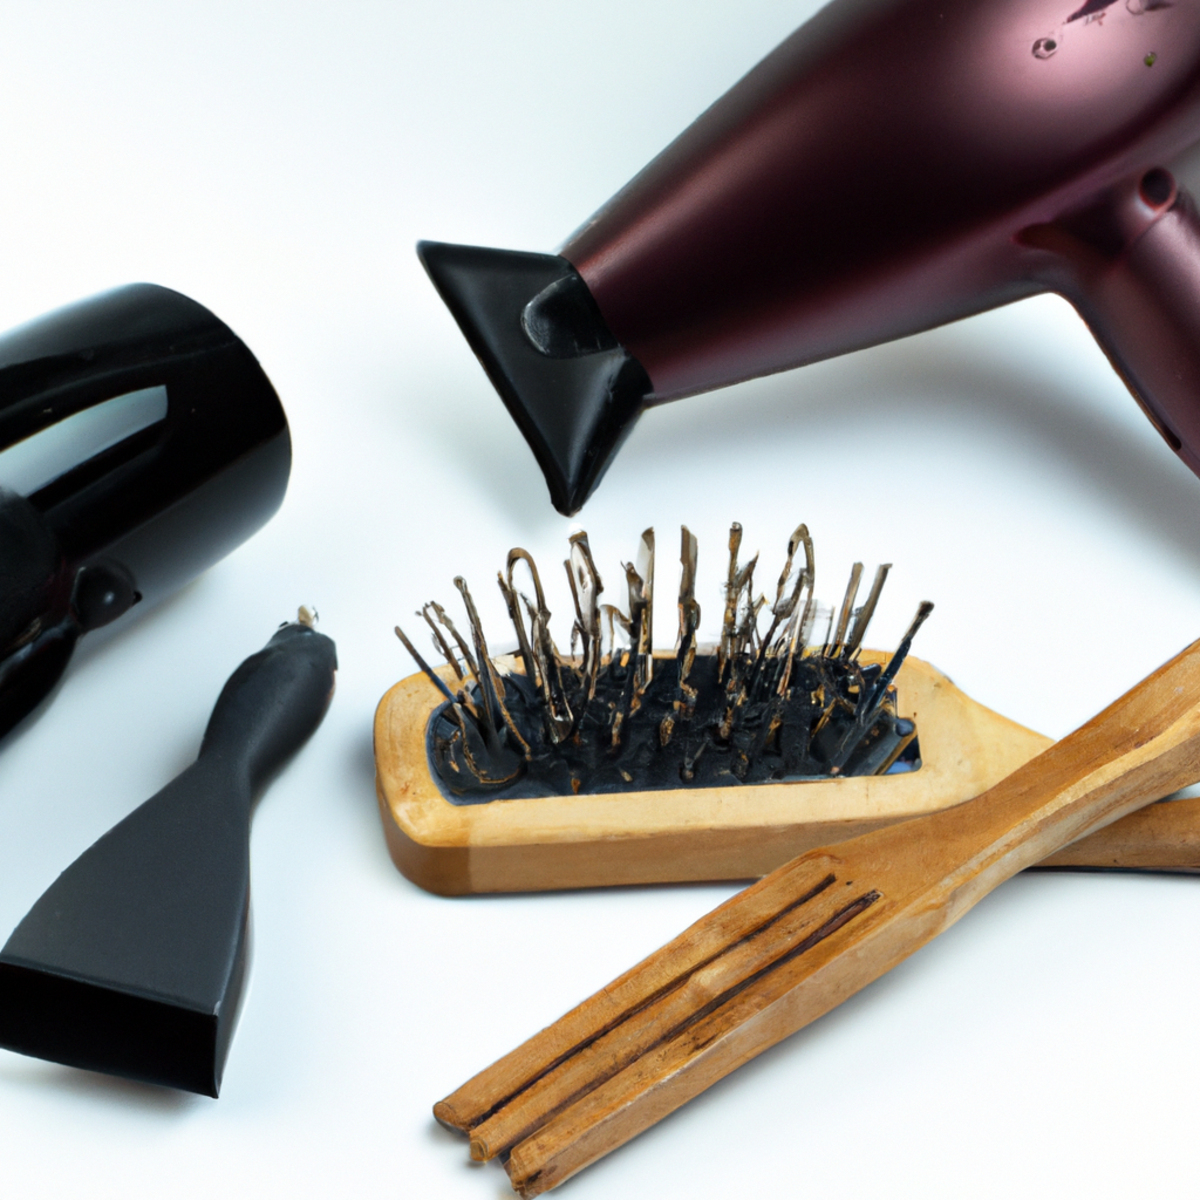 Hair care products and tools on a wooden vanity table, with damaged hair in the foreground.